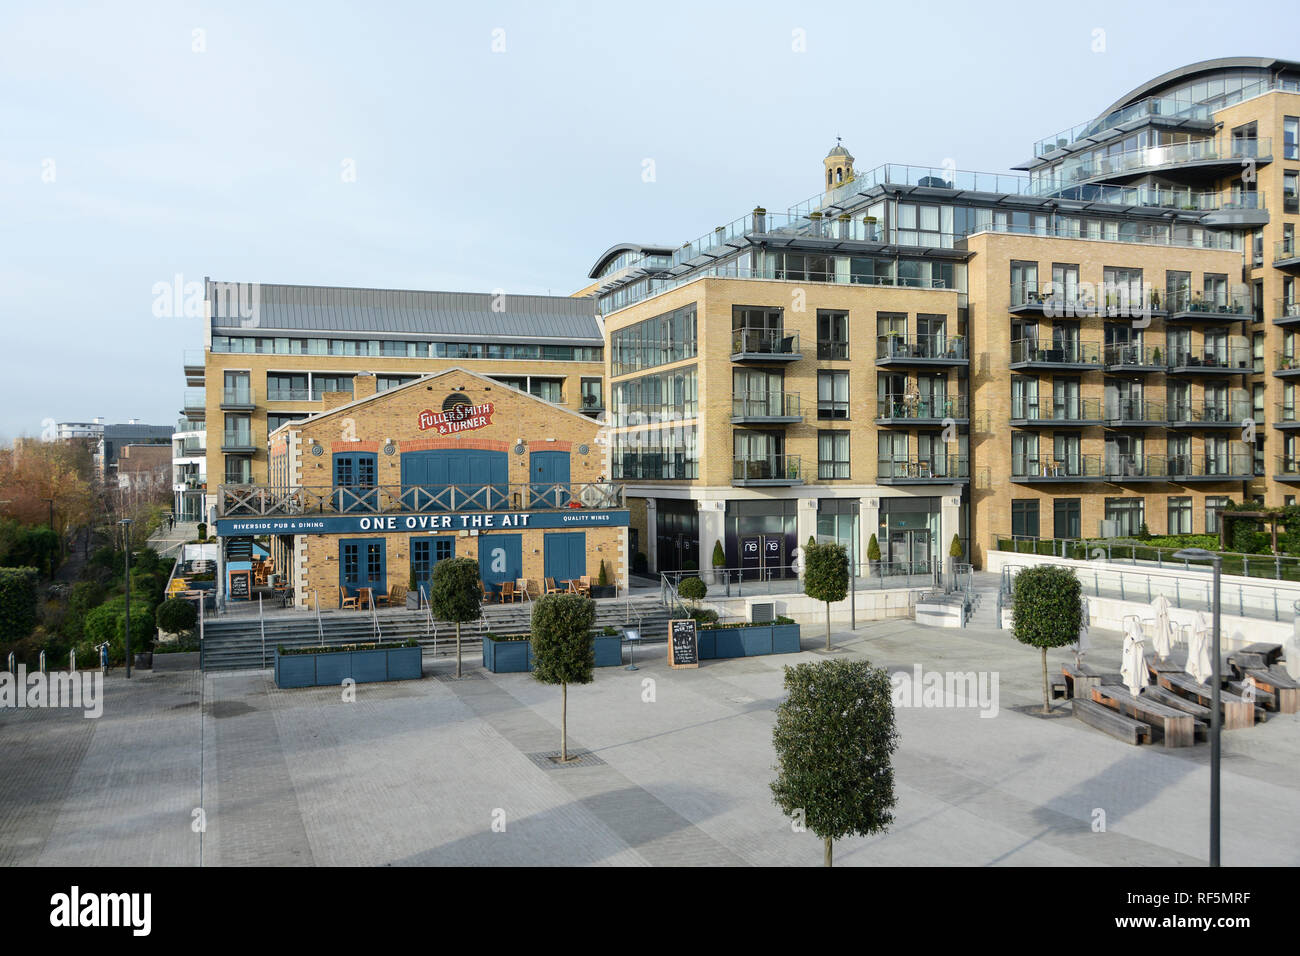 New apartment development and the One Over the Ait Public House, Kew Bridge Road, Brentford, London, TW8, UK Stock Photo